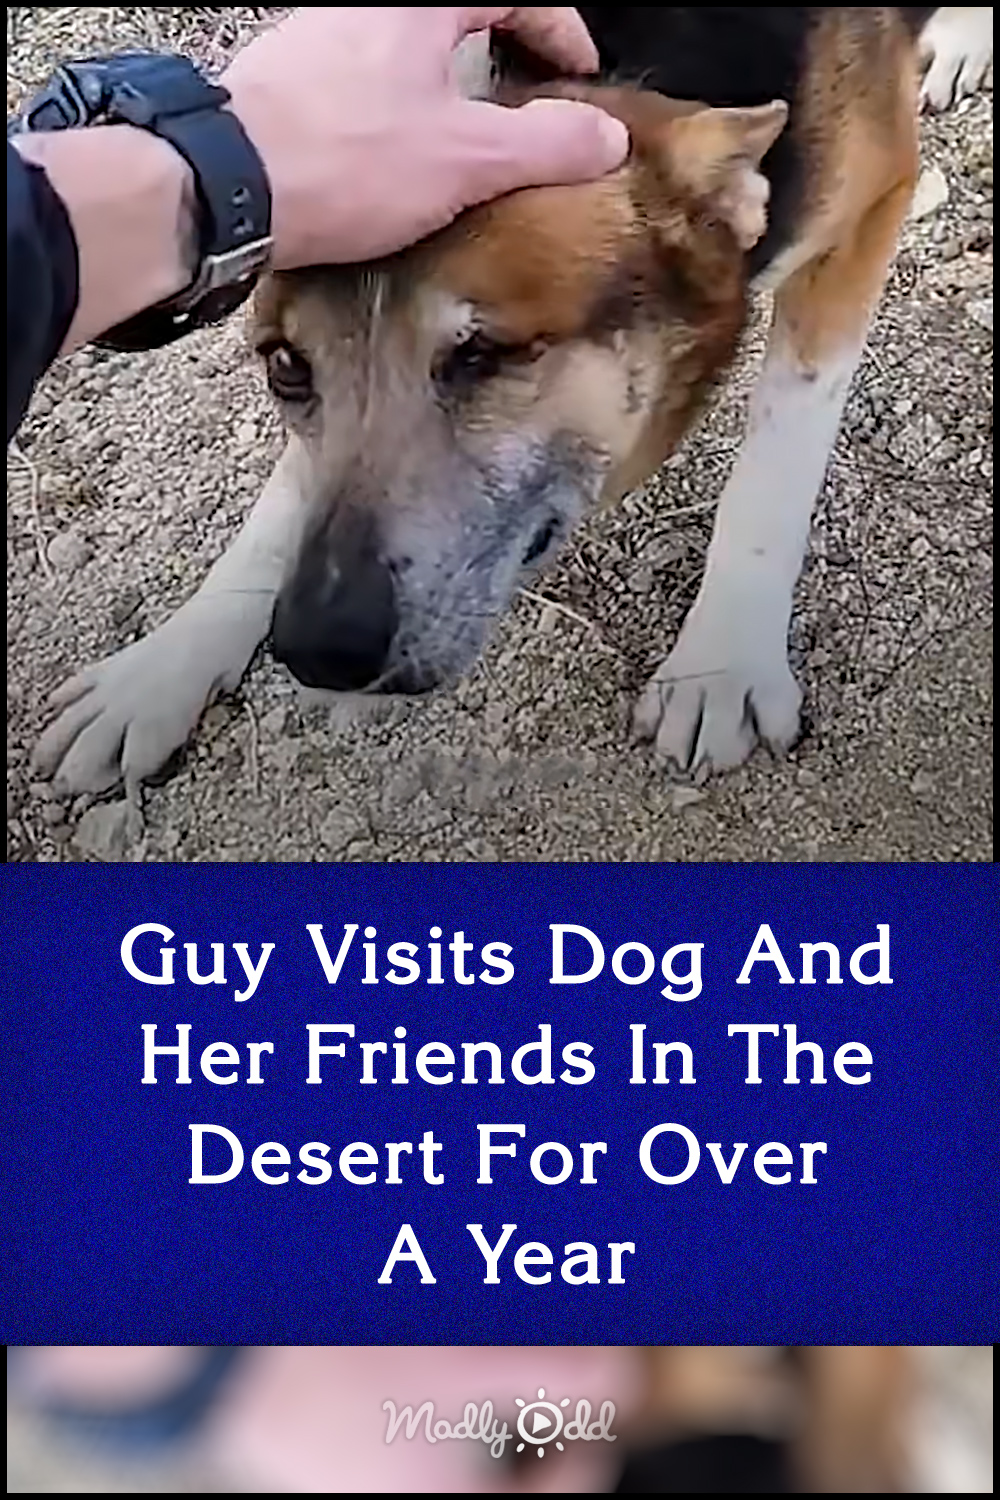 Guy Visits Dog And Her Friends In The Desert For Over A Year